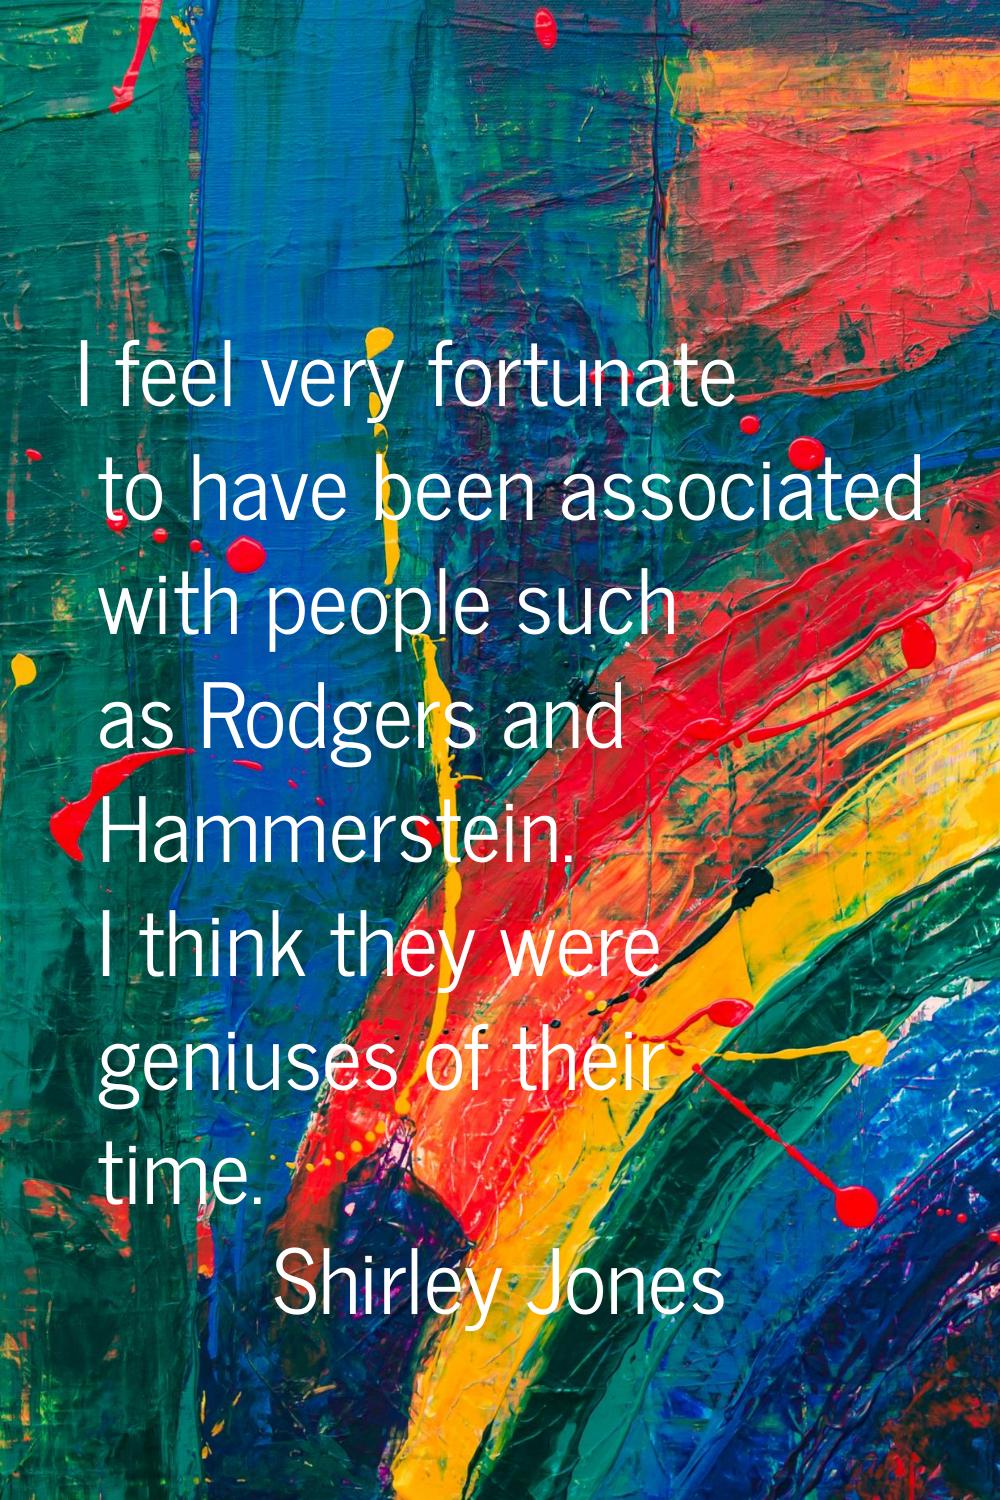 I feel very fortunate to have been associated with people such as Rodgers and Hammerstein. I think 